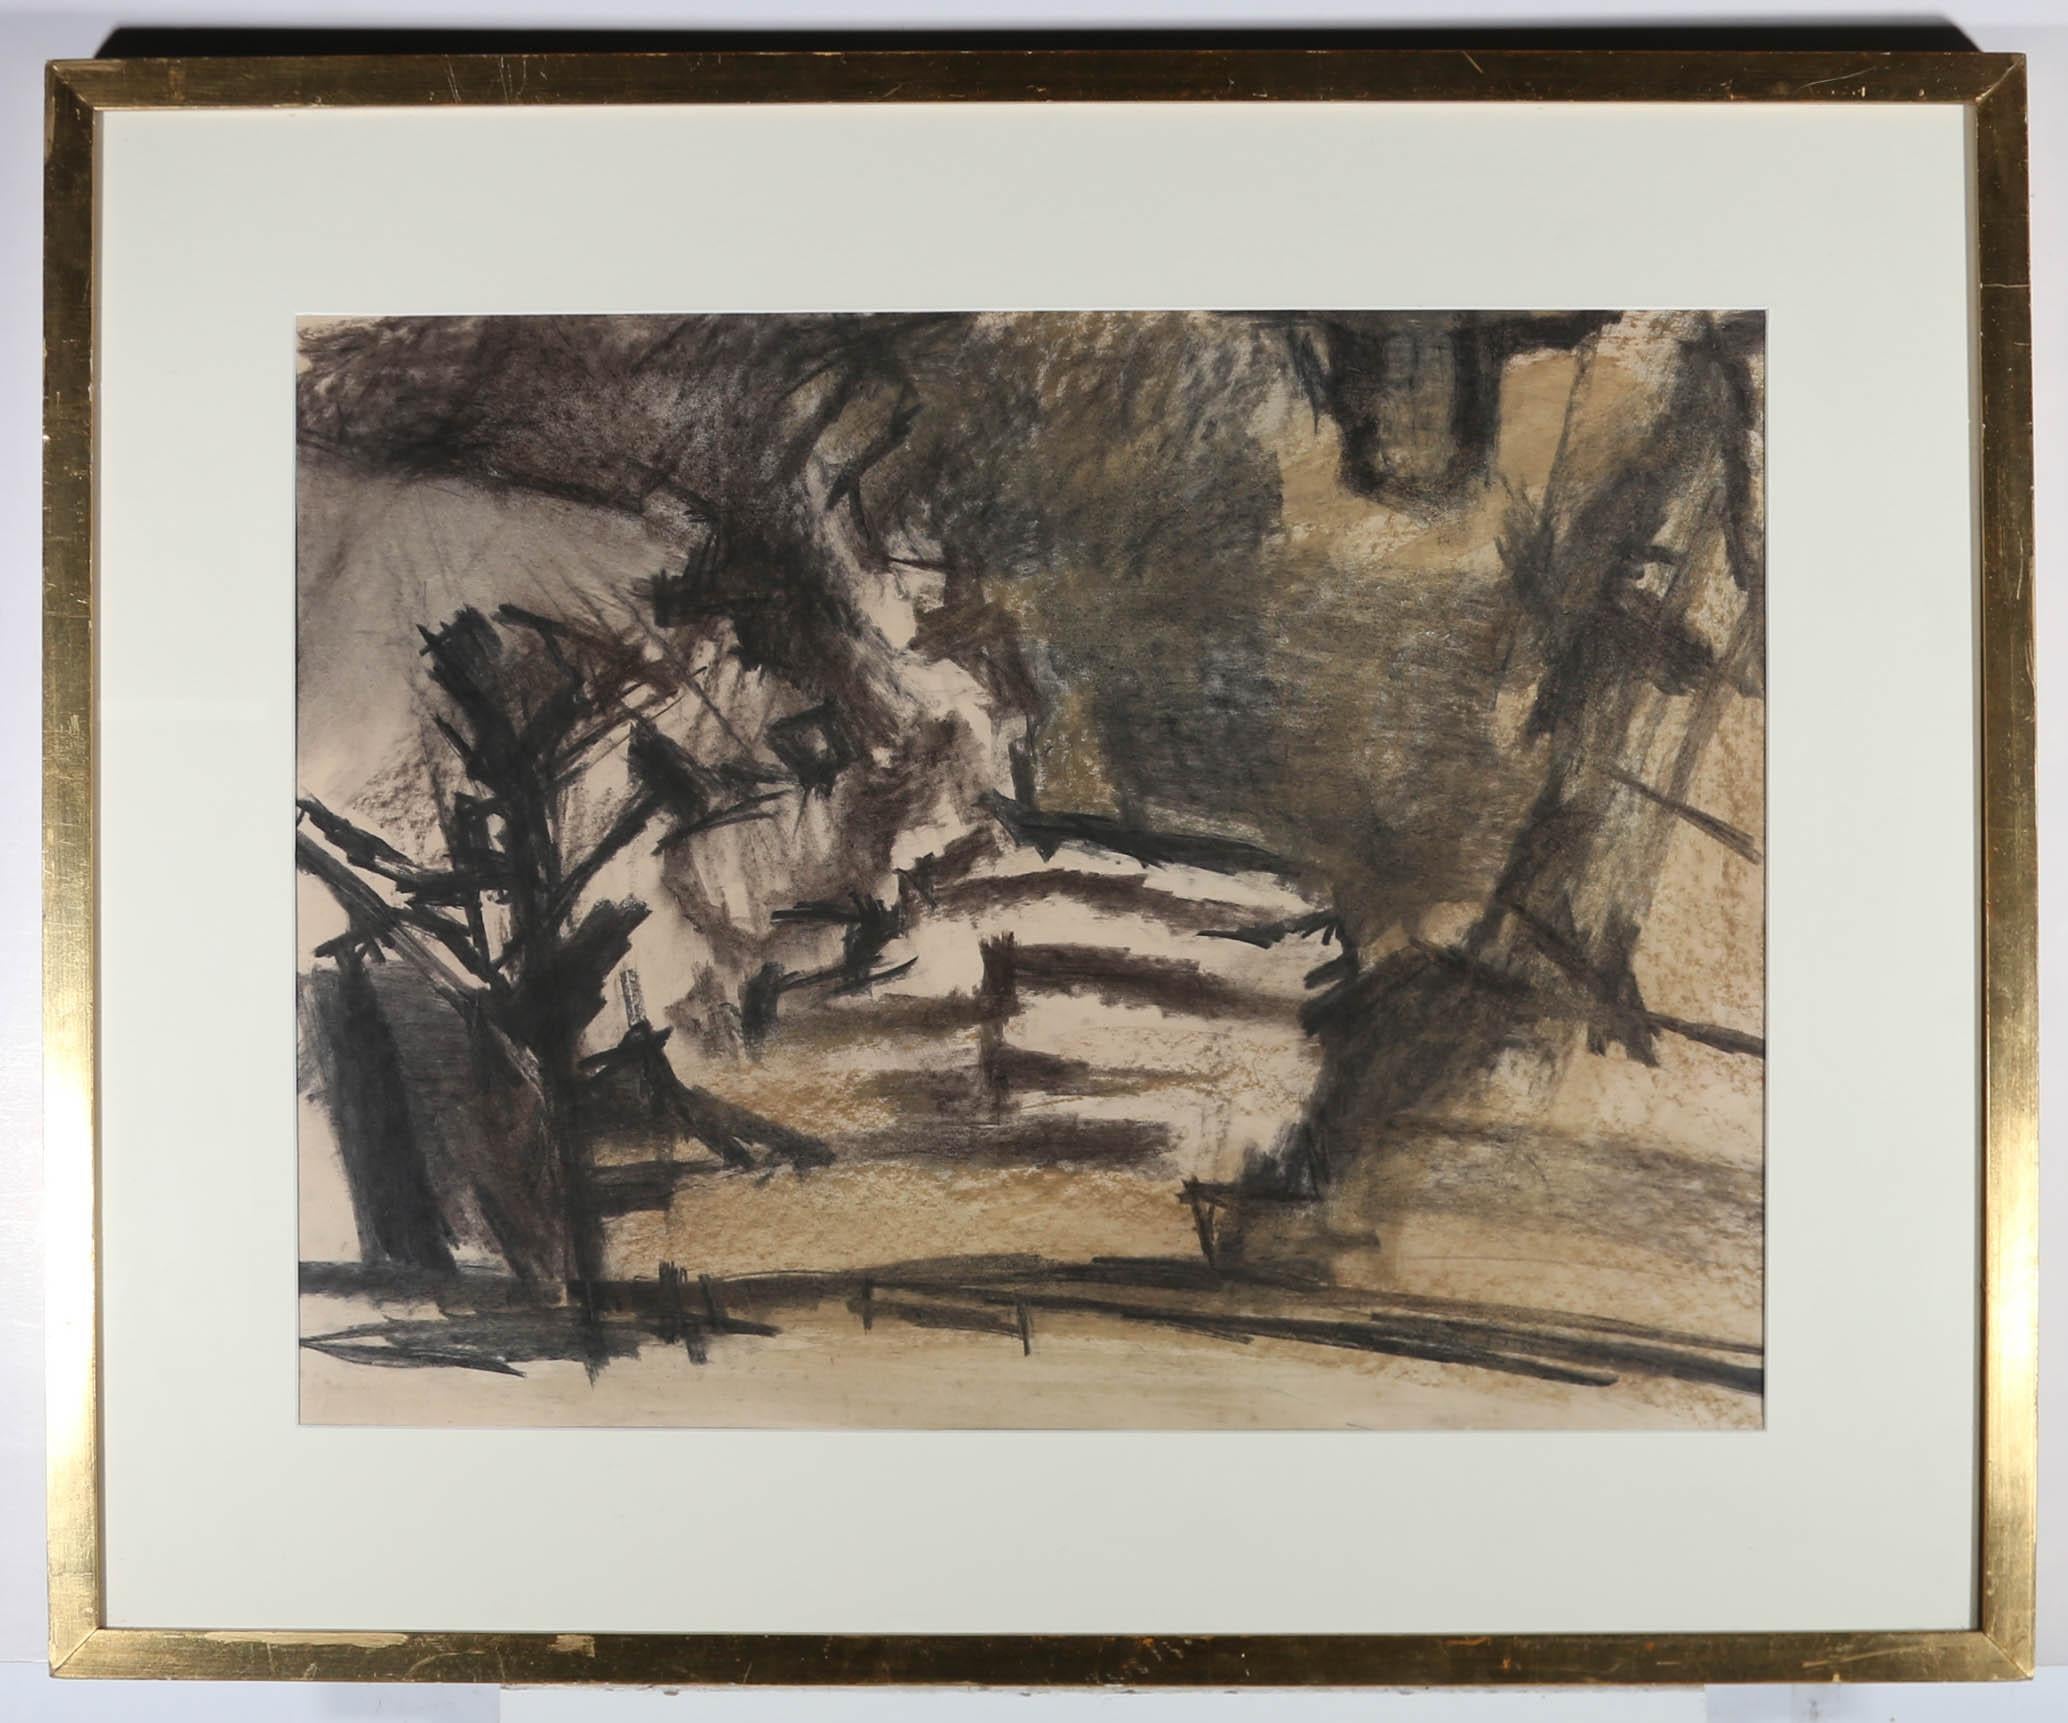 A striking British School abstract landscape in charcoal and coloured chalk. The drawing is unsigned and presented in a simple gilt frame with card mount. On paper.